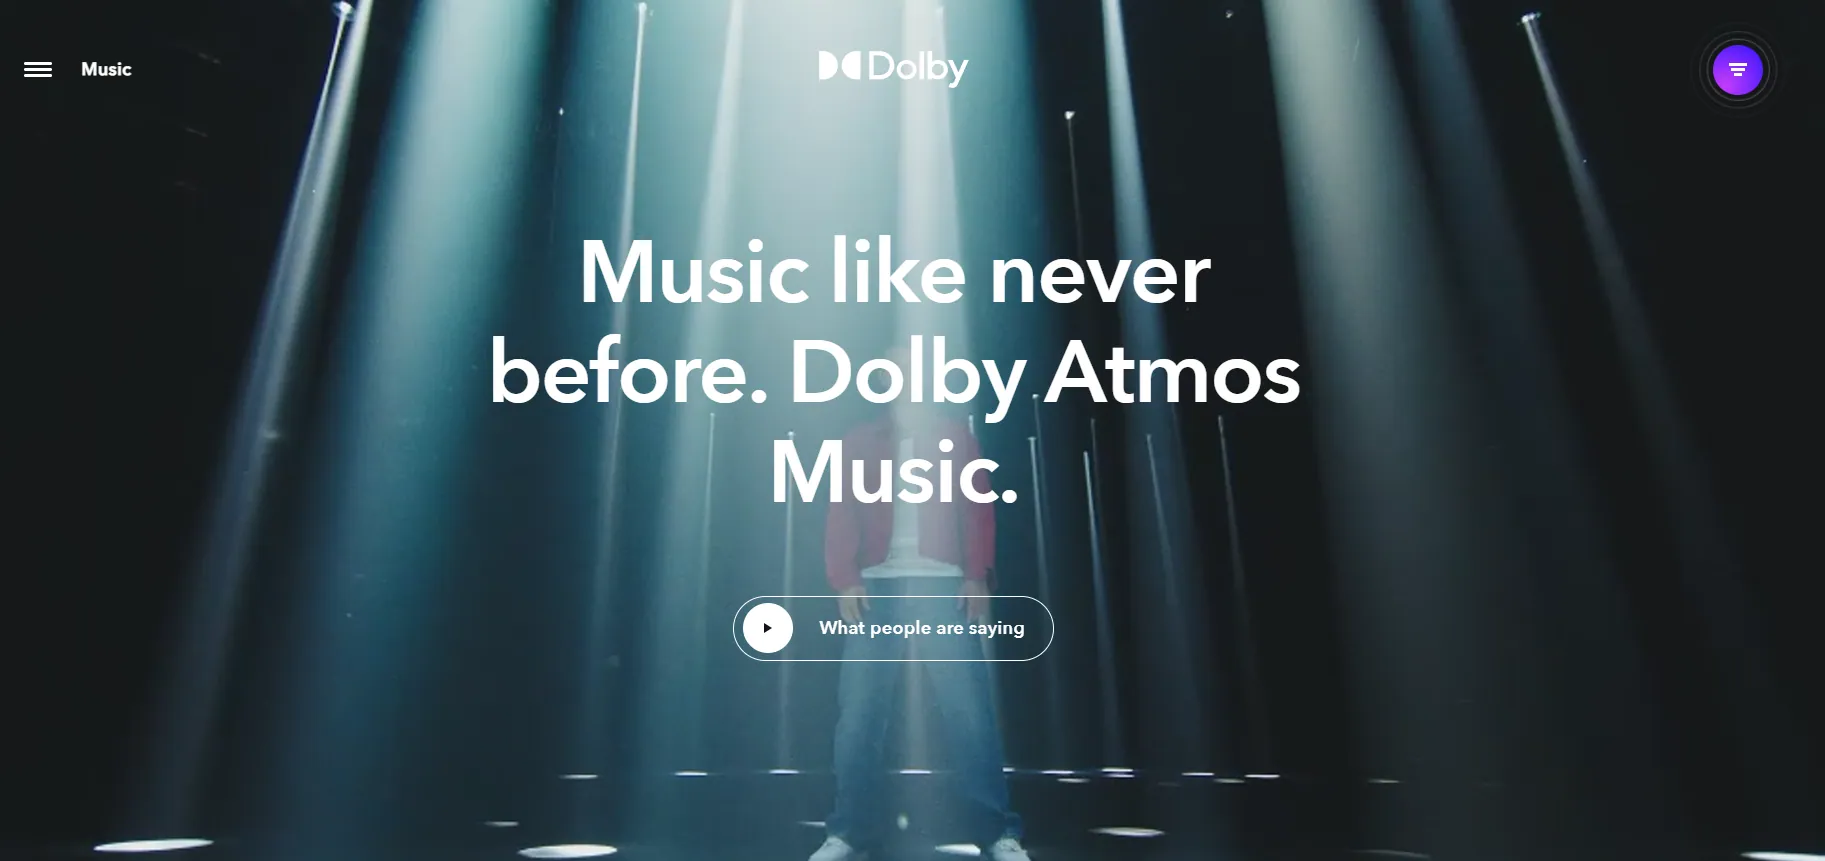 The pursuit image shows a screenshot of a Dolby Atmos video landing page.